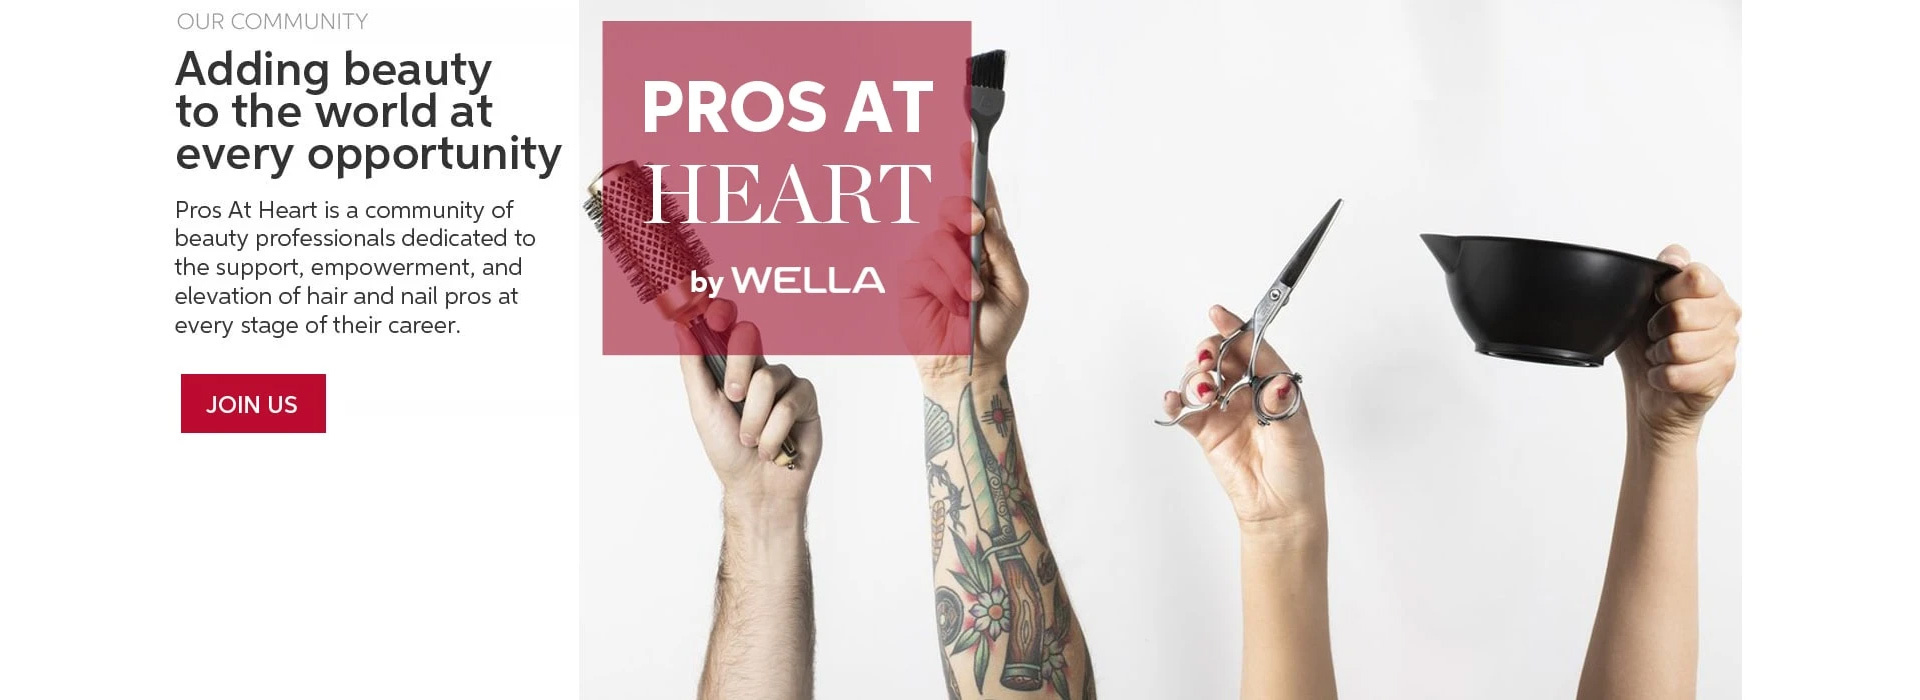 Pros At Heart by Wella 